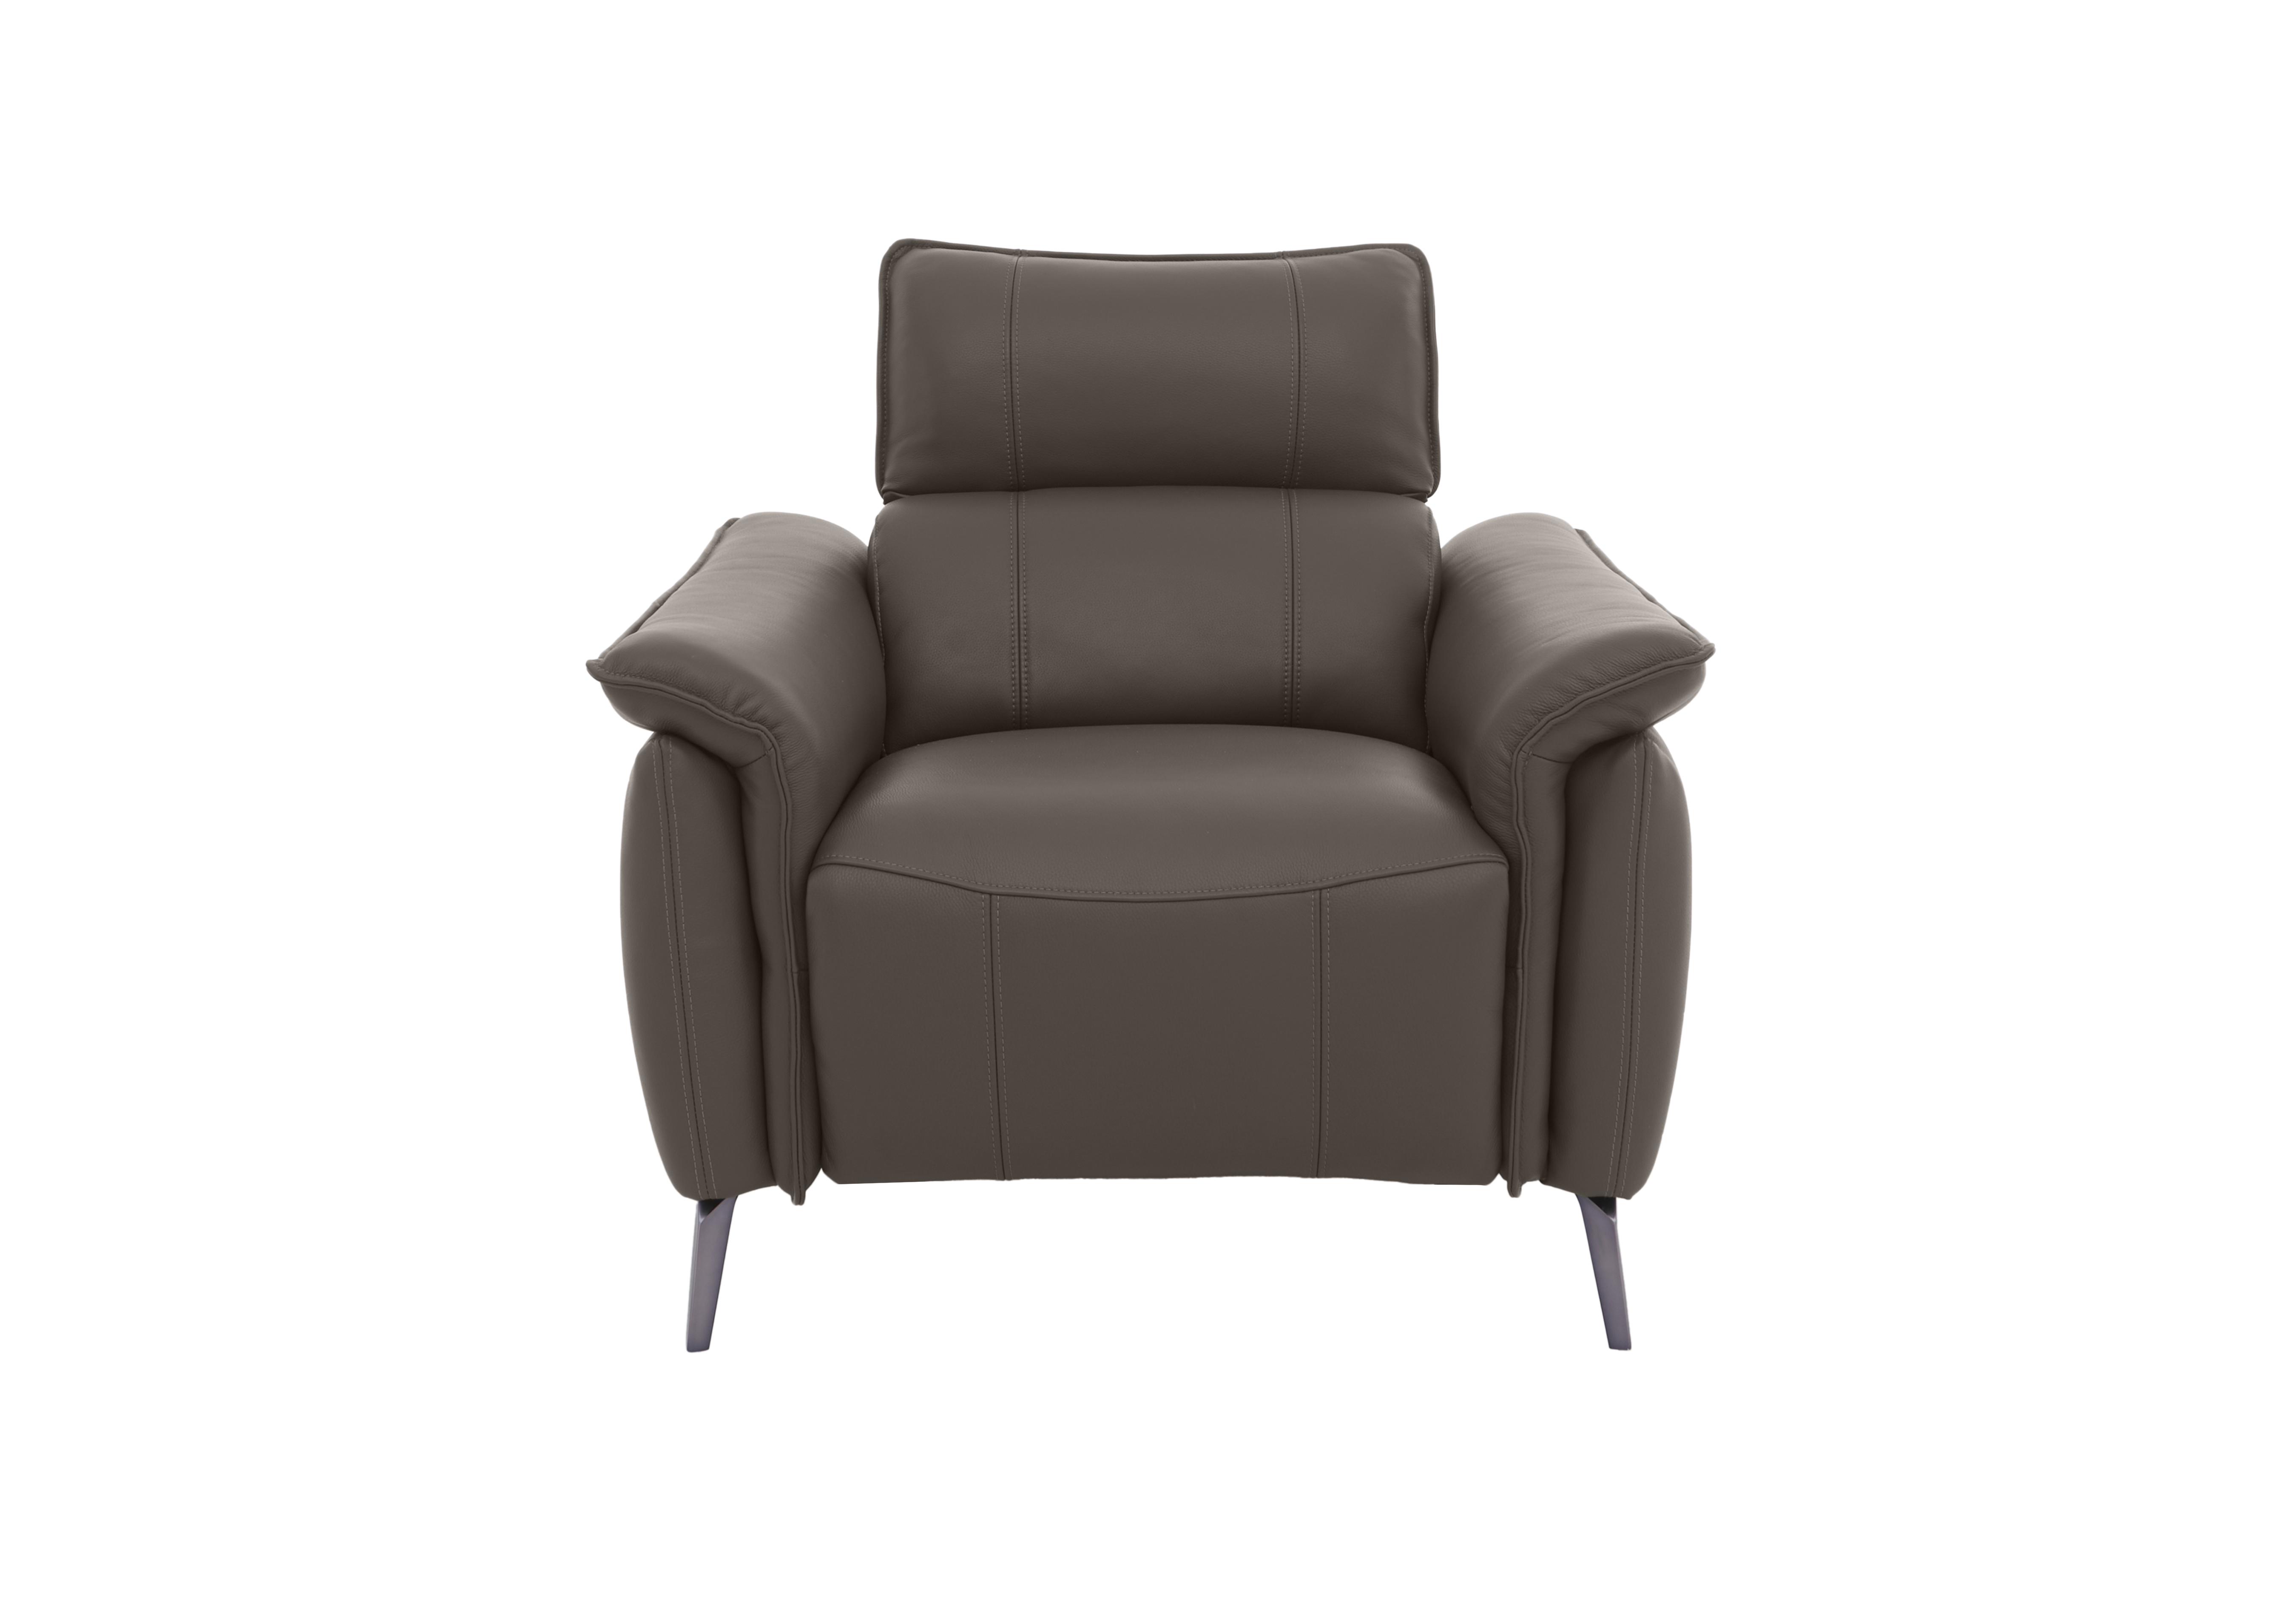 Jude Leather Armchair in Montana Storm Cat-60/21 on Furniture Village